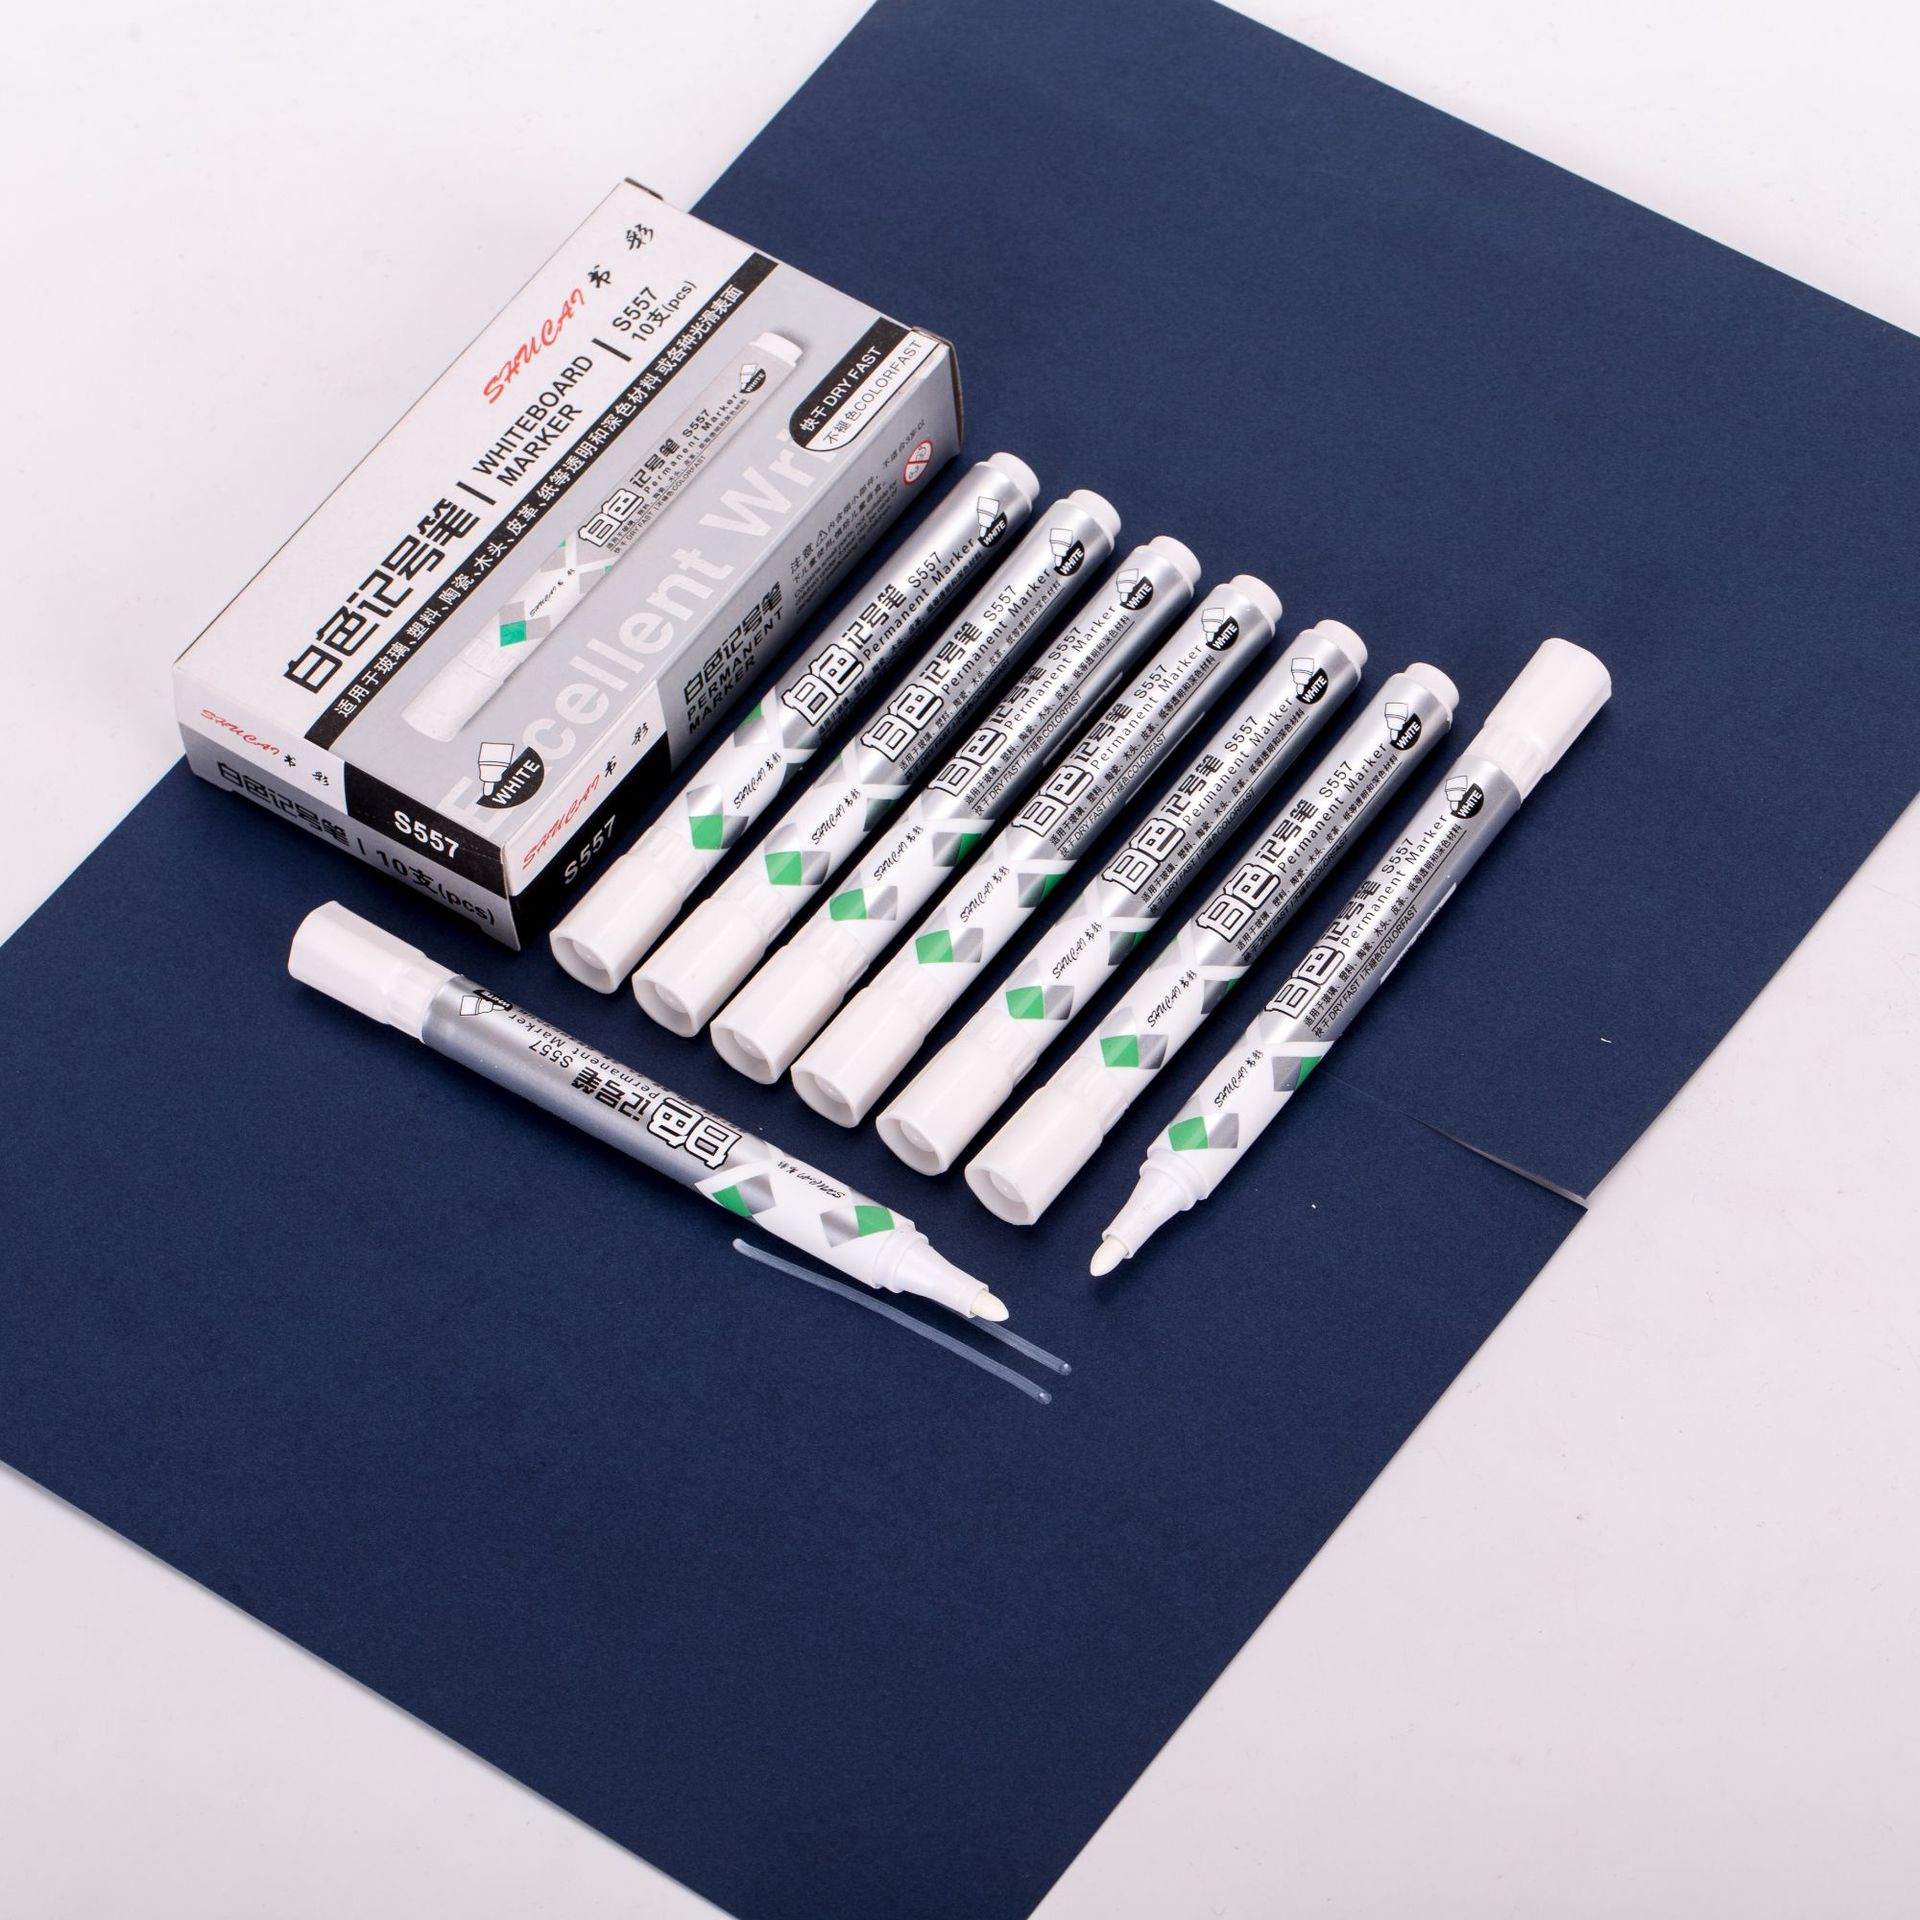 White Marking Pen Does Not Erasable Pen Factory Direct Supply Waterproof Does Not Fade a Variety of Marker Mark Oily Marking Pen